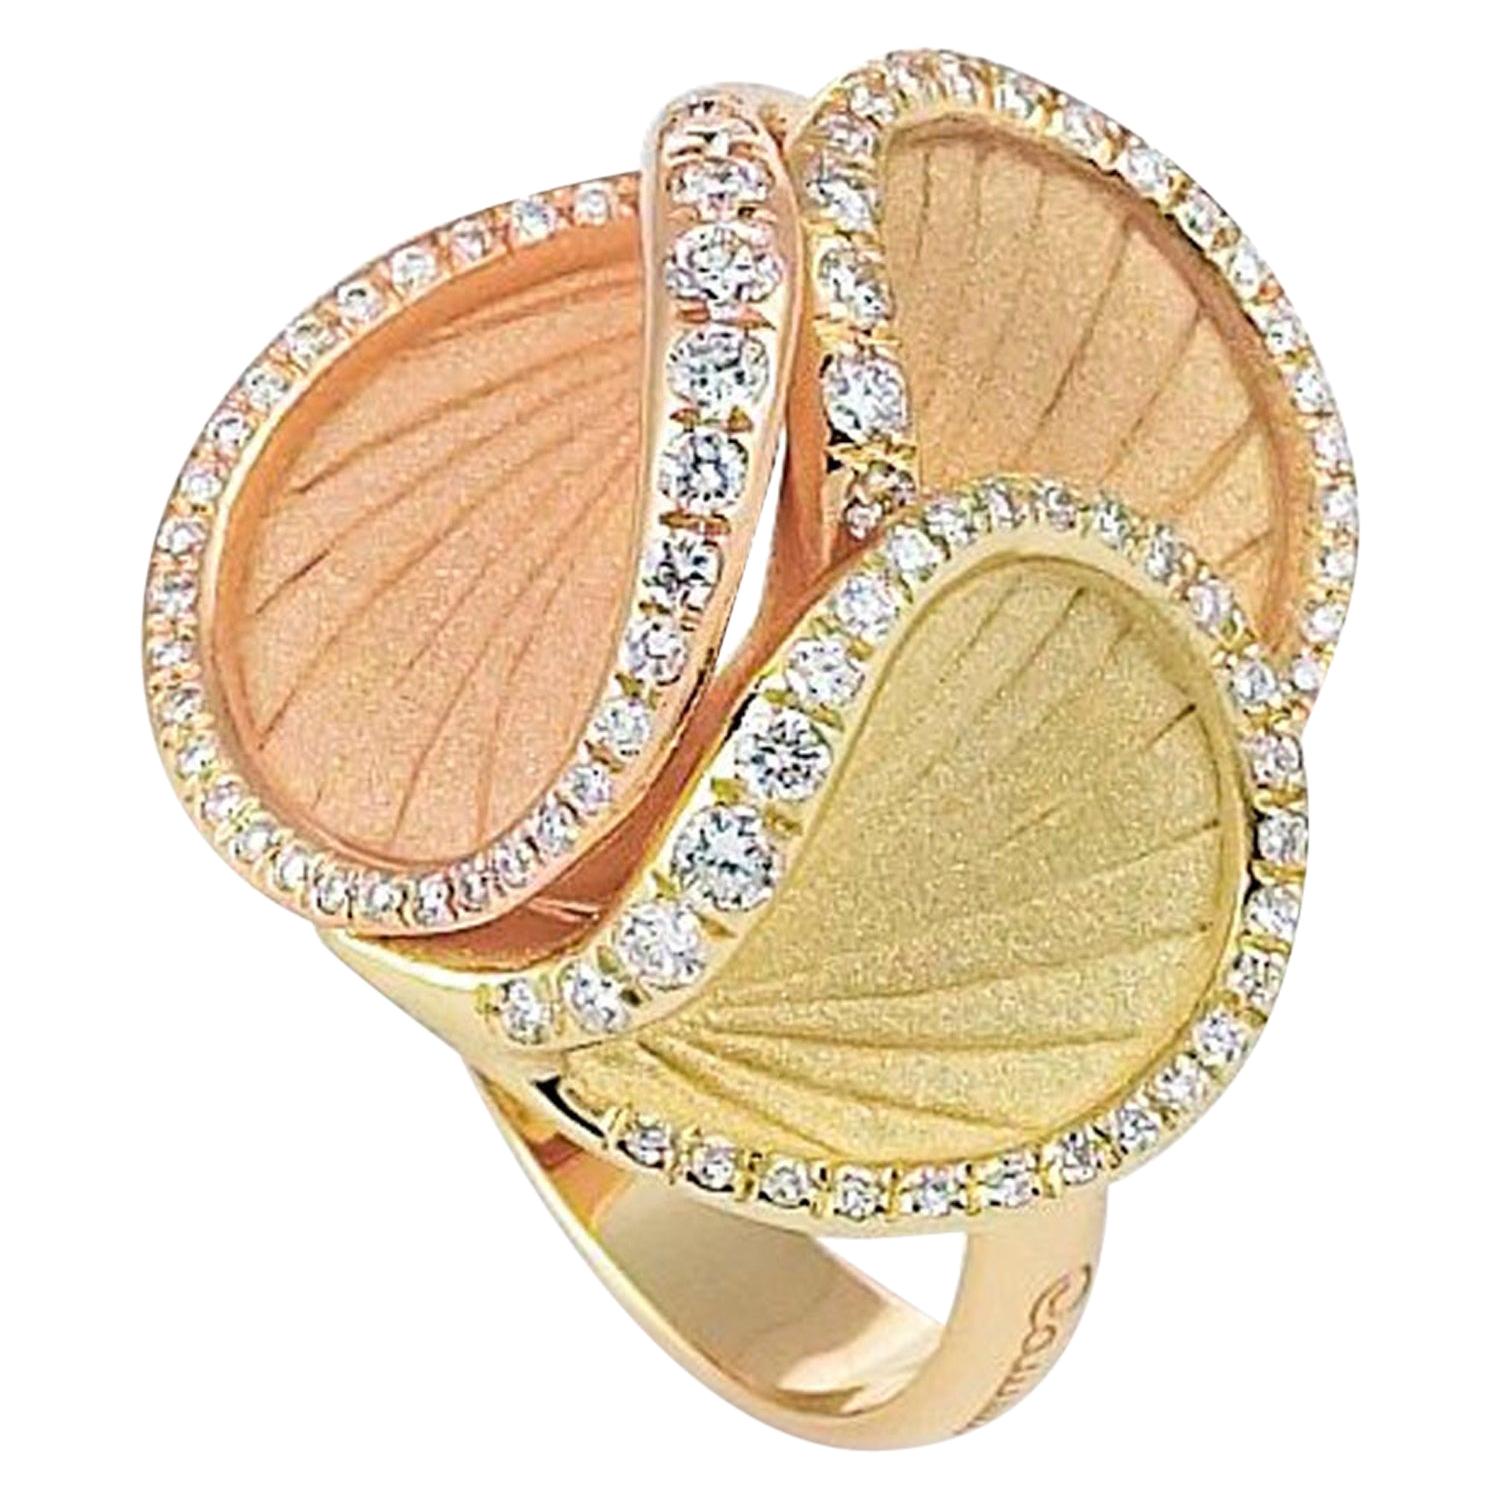 For Sale:  Annamaria Cammilli "Musa" Ring with Diamonds in Three Colors of 18 Karat Gold